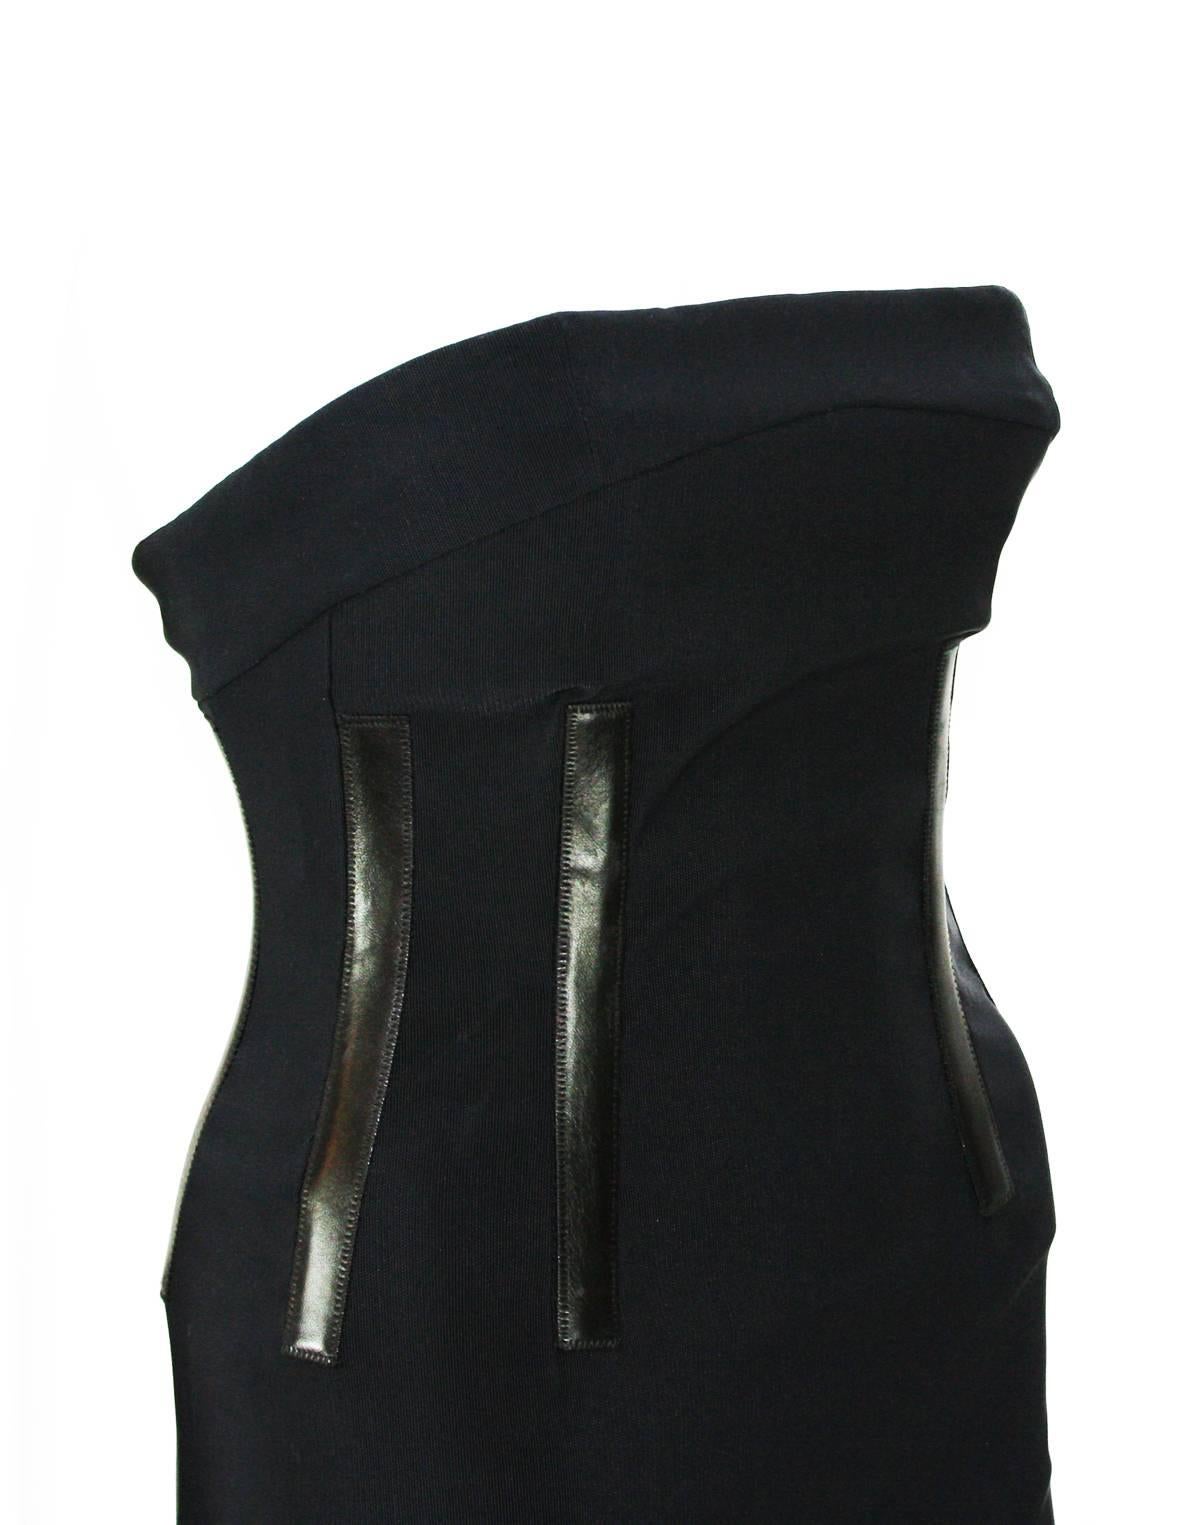 TOM FORD for GUCCI S/S 2001 Corset Leather Detail Cocktail Black Dress 40 - 2/4 For Sale 1